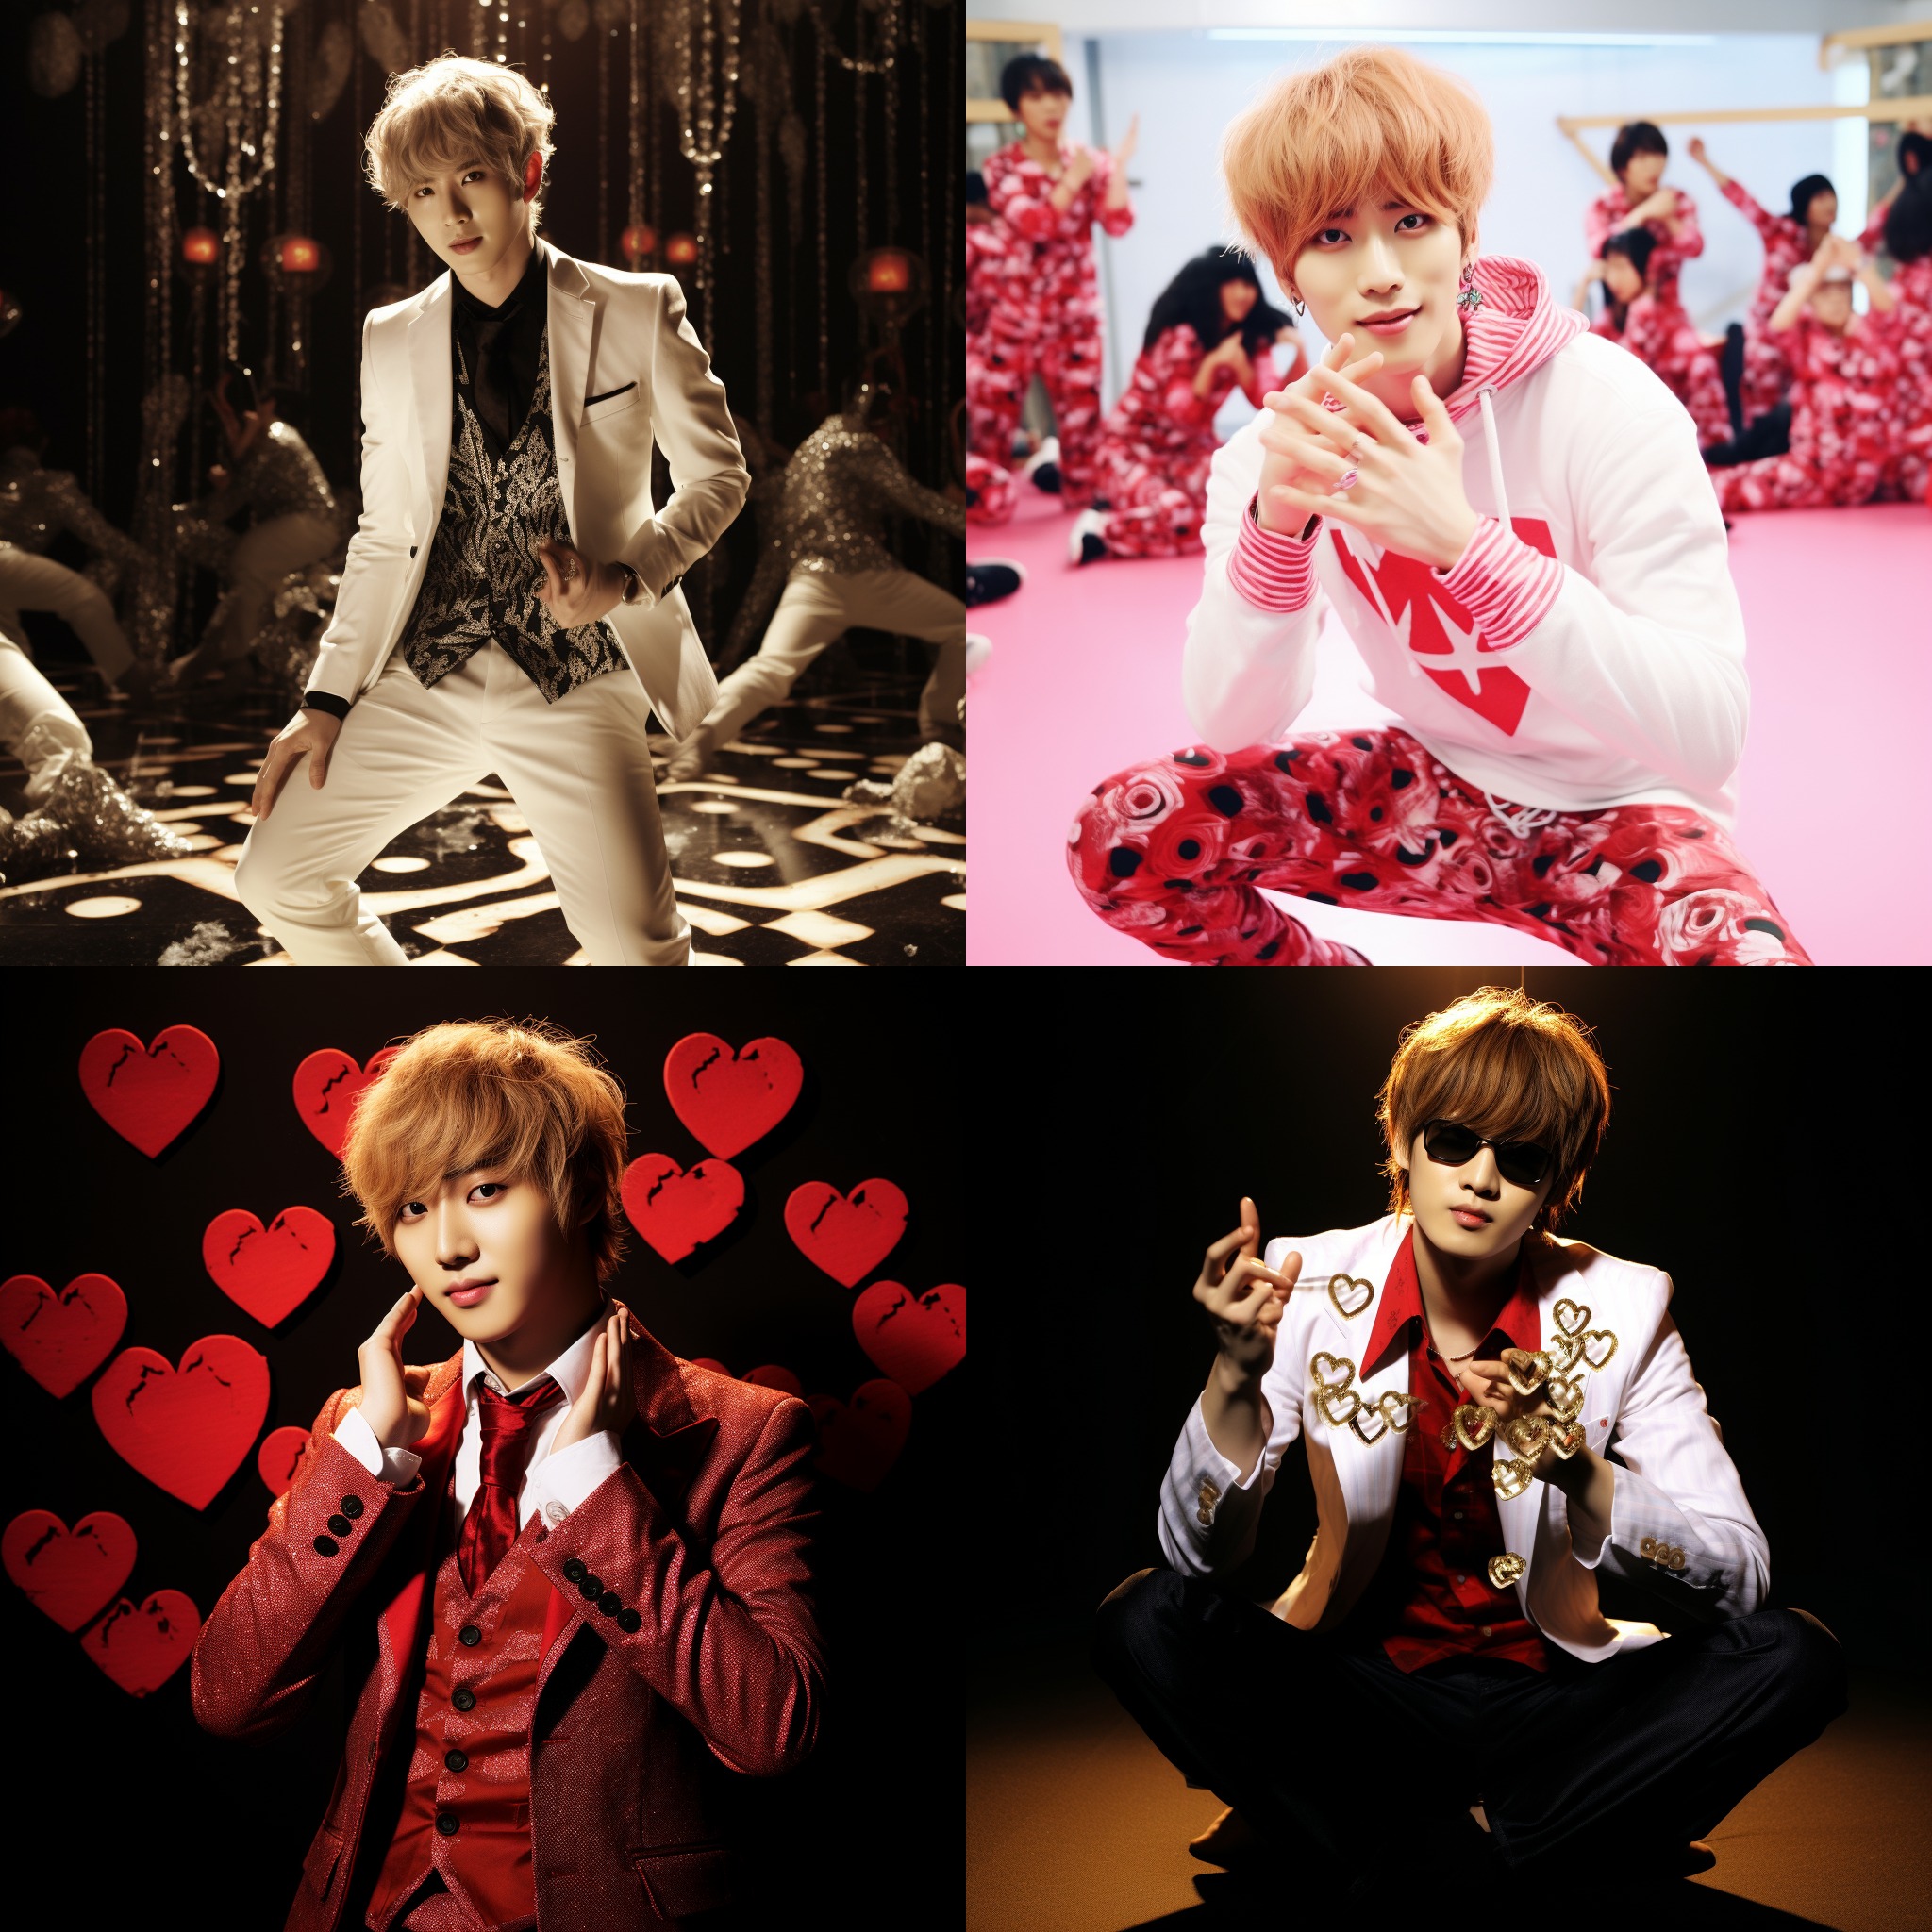 Eunhyuk from Super Junior dancing with hearts around him.